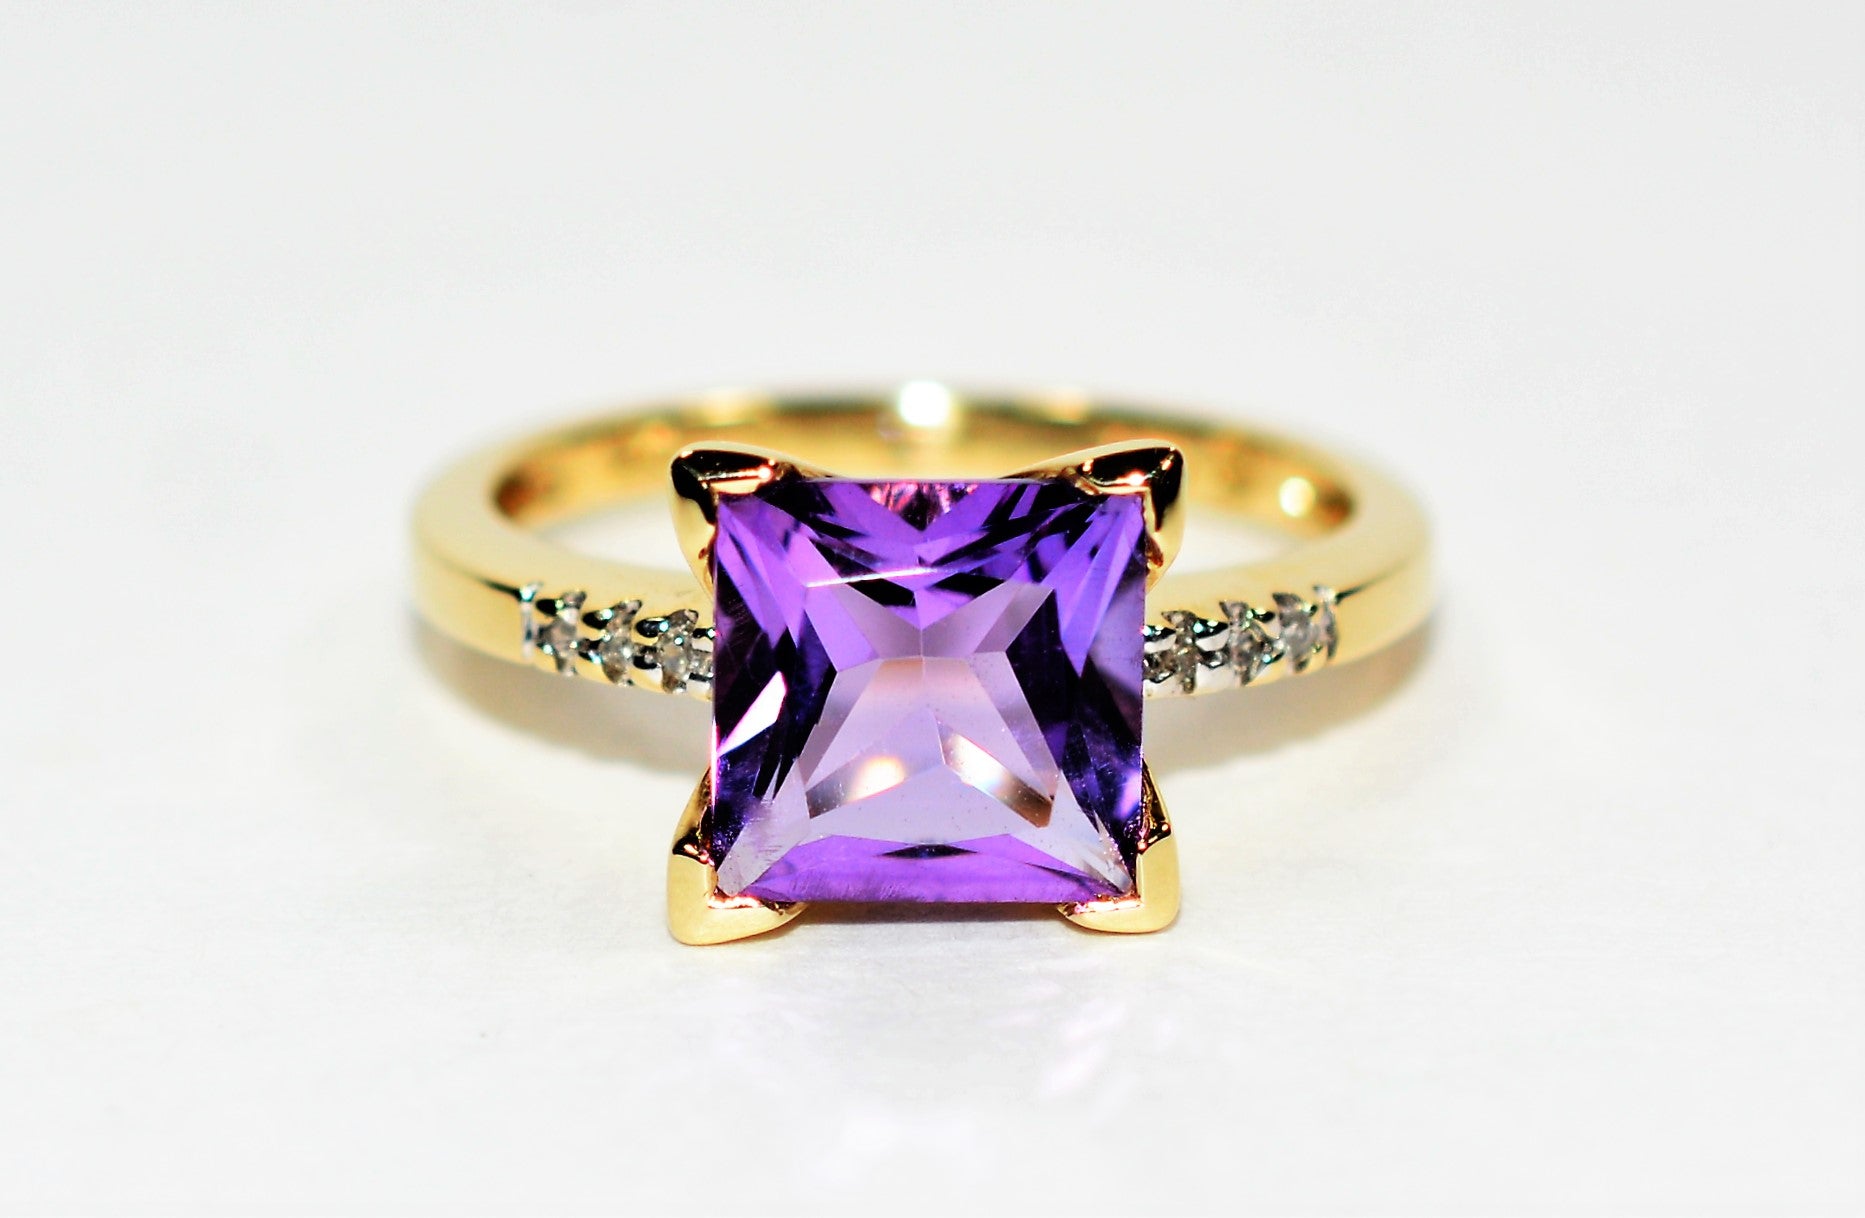 Natural Amethyst & Diamond Ring 10K Solid Gold 2.06tcw Gemstone Ring Birthstone Ring Vintage Ring Purple Ring Estate Ring Jewellery Jewelry